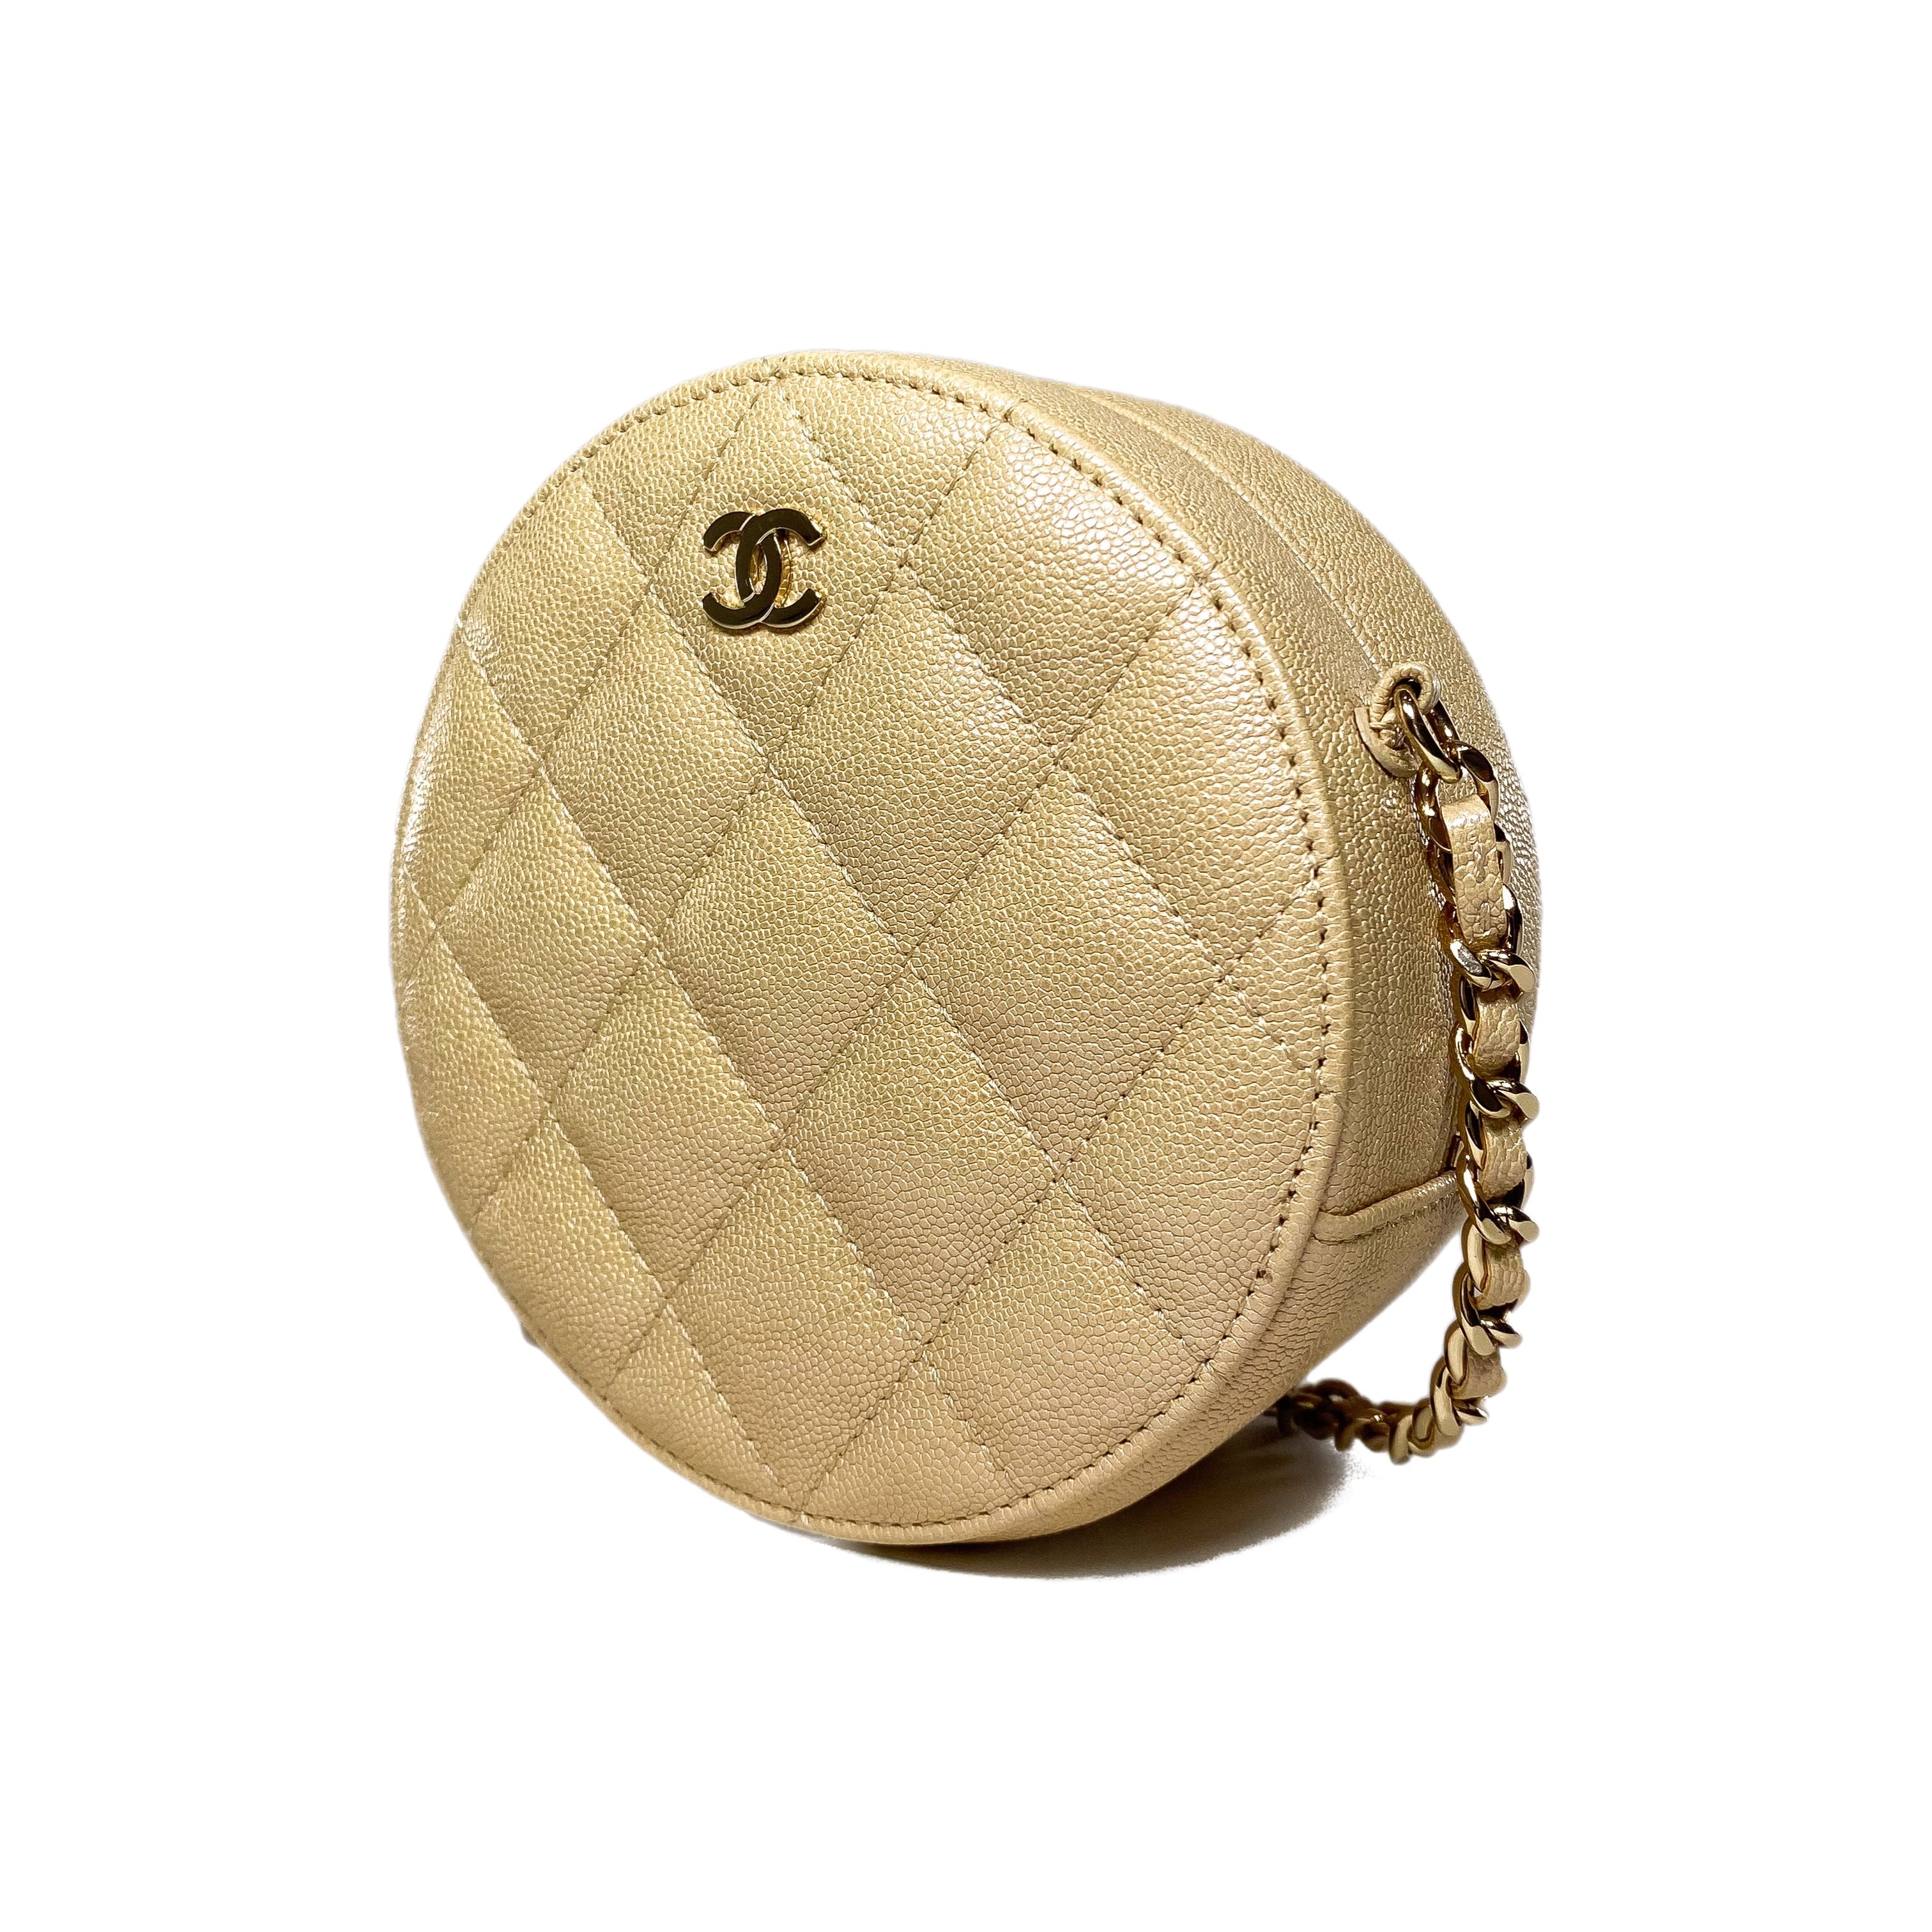 Chanel Beige Iridescent Quilted Caviar Round Clutch with Chain